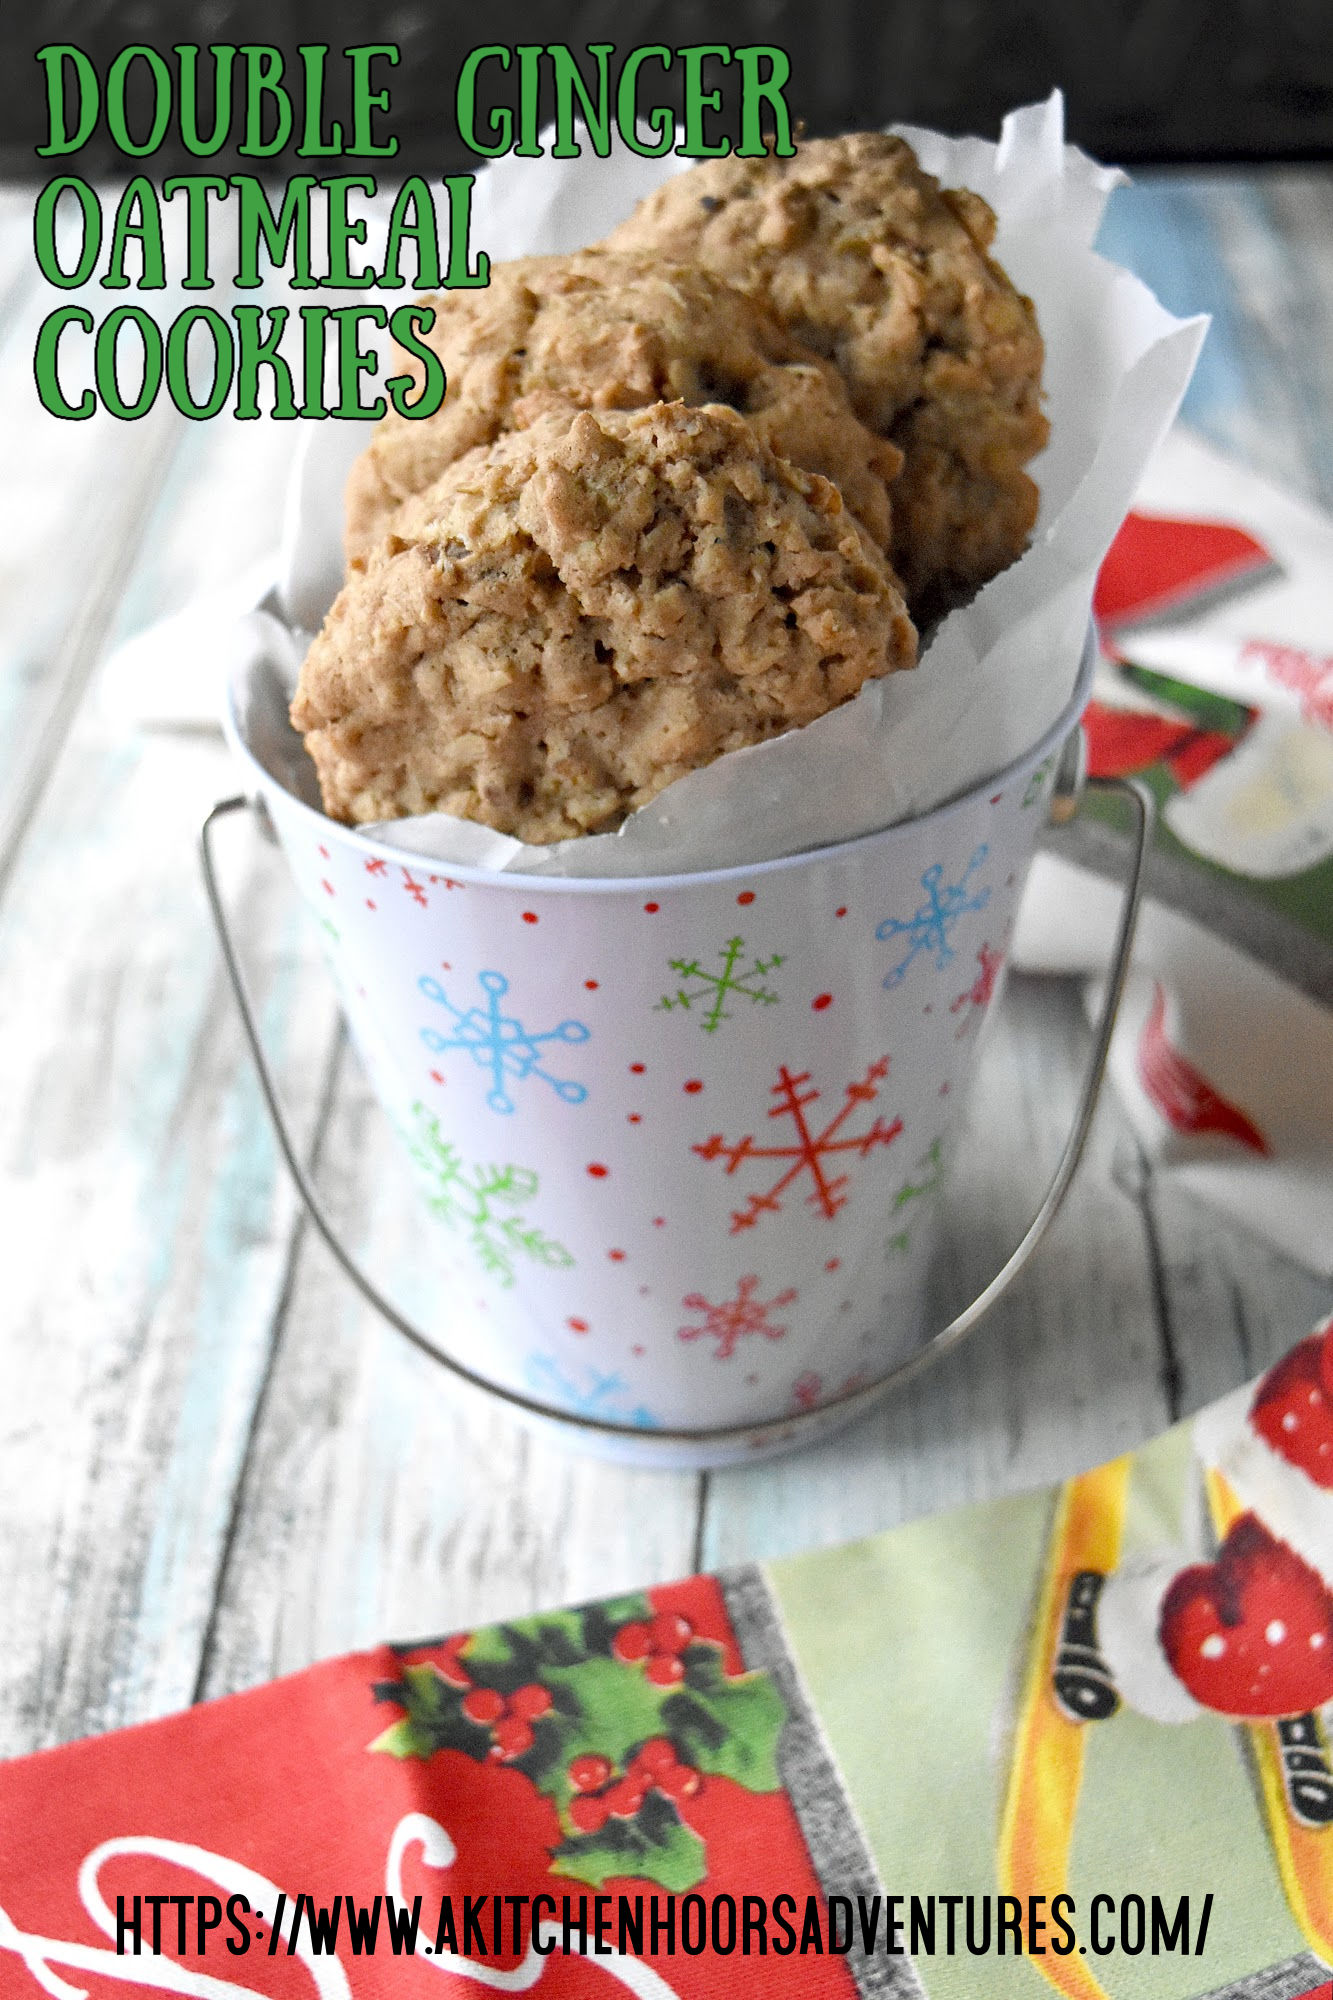 Double Ginger Oatmeal Cookies have two kinds of ginger in them for two times the delicious ginger oatmeal flavor.  There’s freshly ground ginger and chopped stem ginger.   #ChristmasCookies #stemginger #oatmealcookies #gingercookies #doubleginger